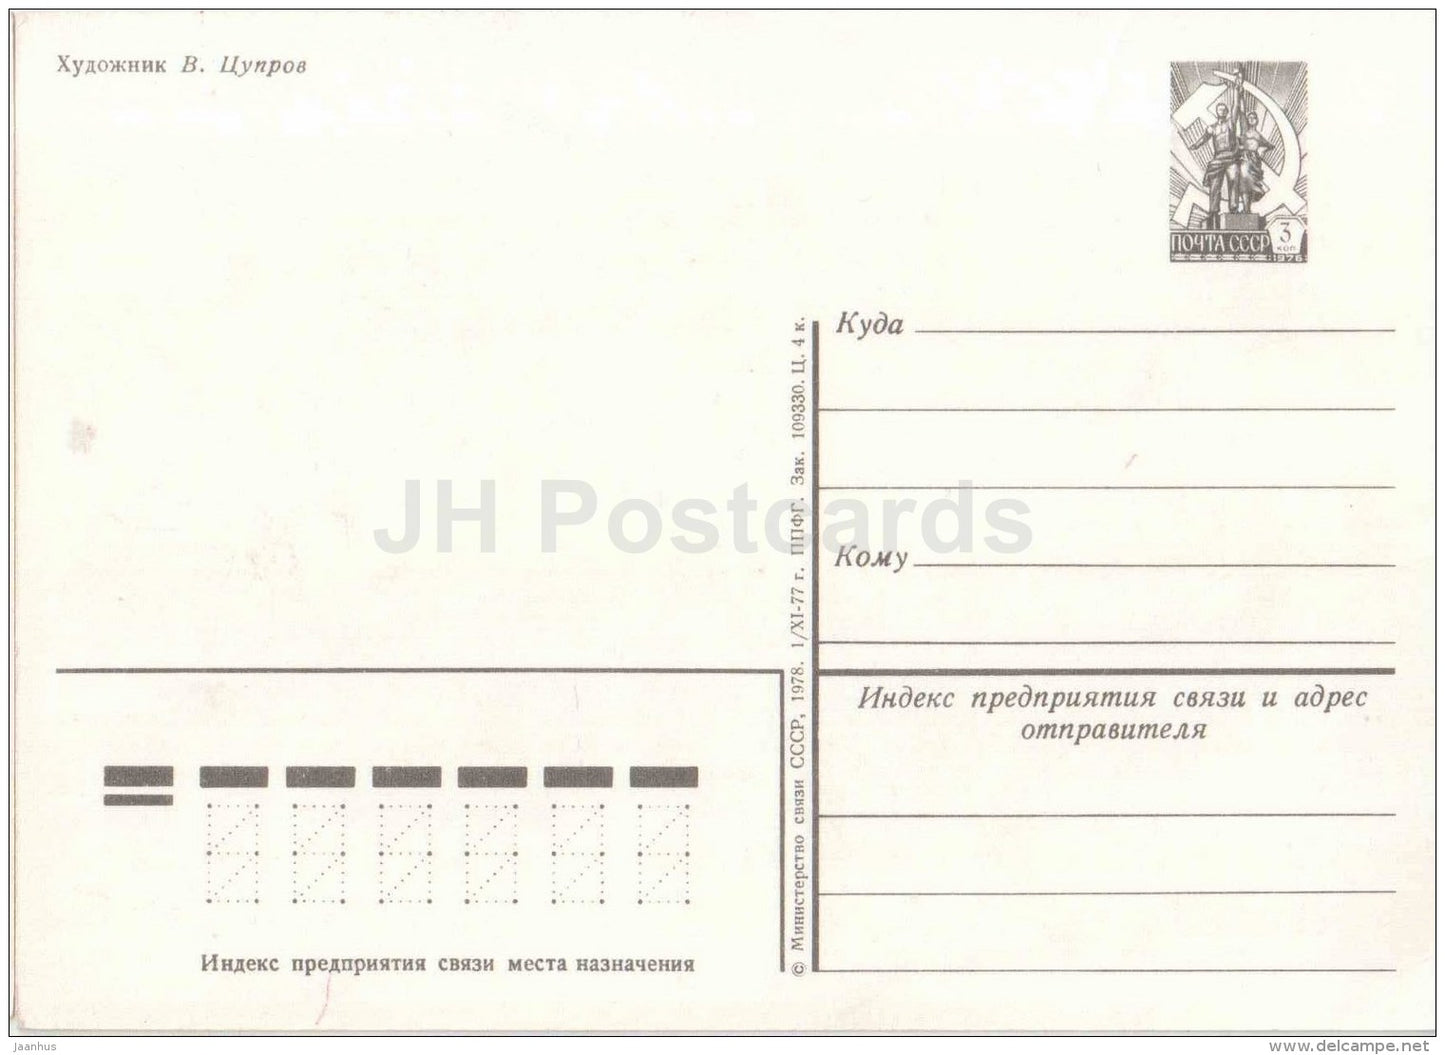 May 1 International Workers' Day greeting card - flowers - 1978 - Russia USSR - unused - JH Postcards